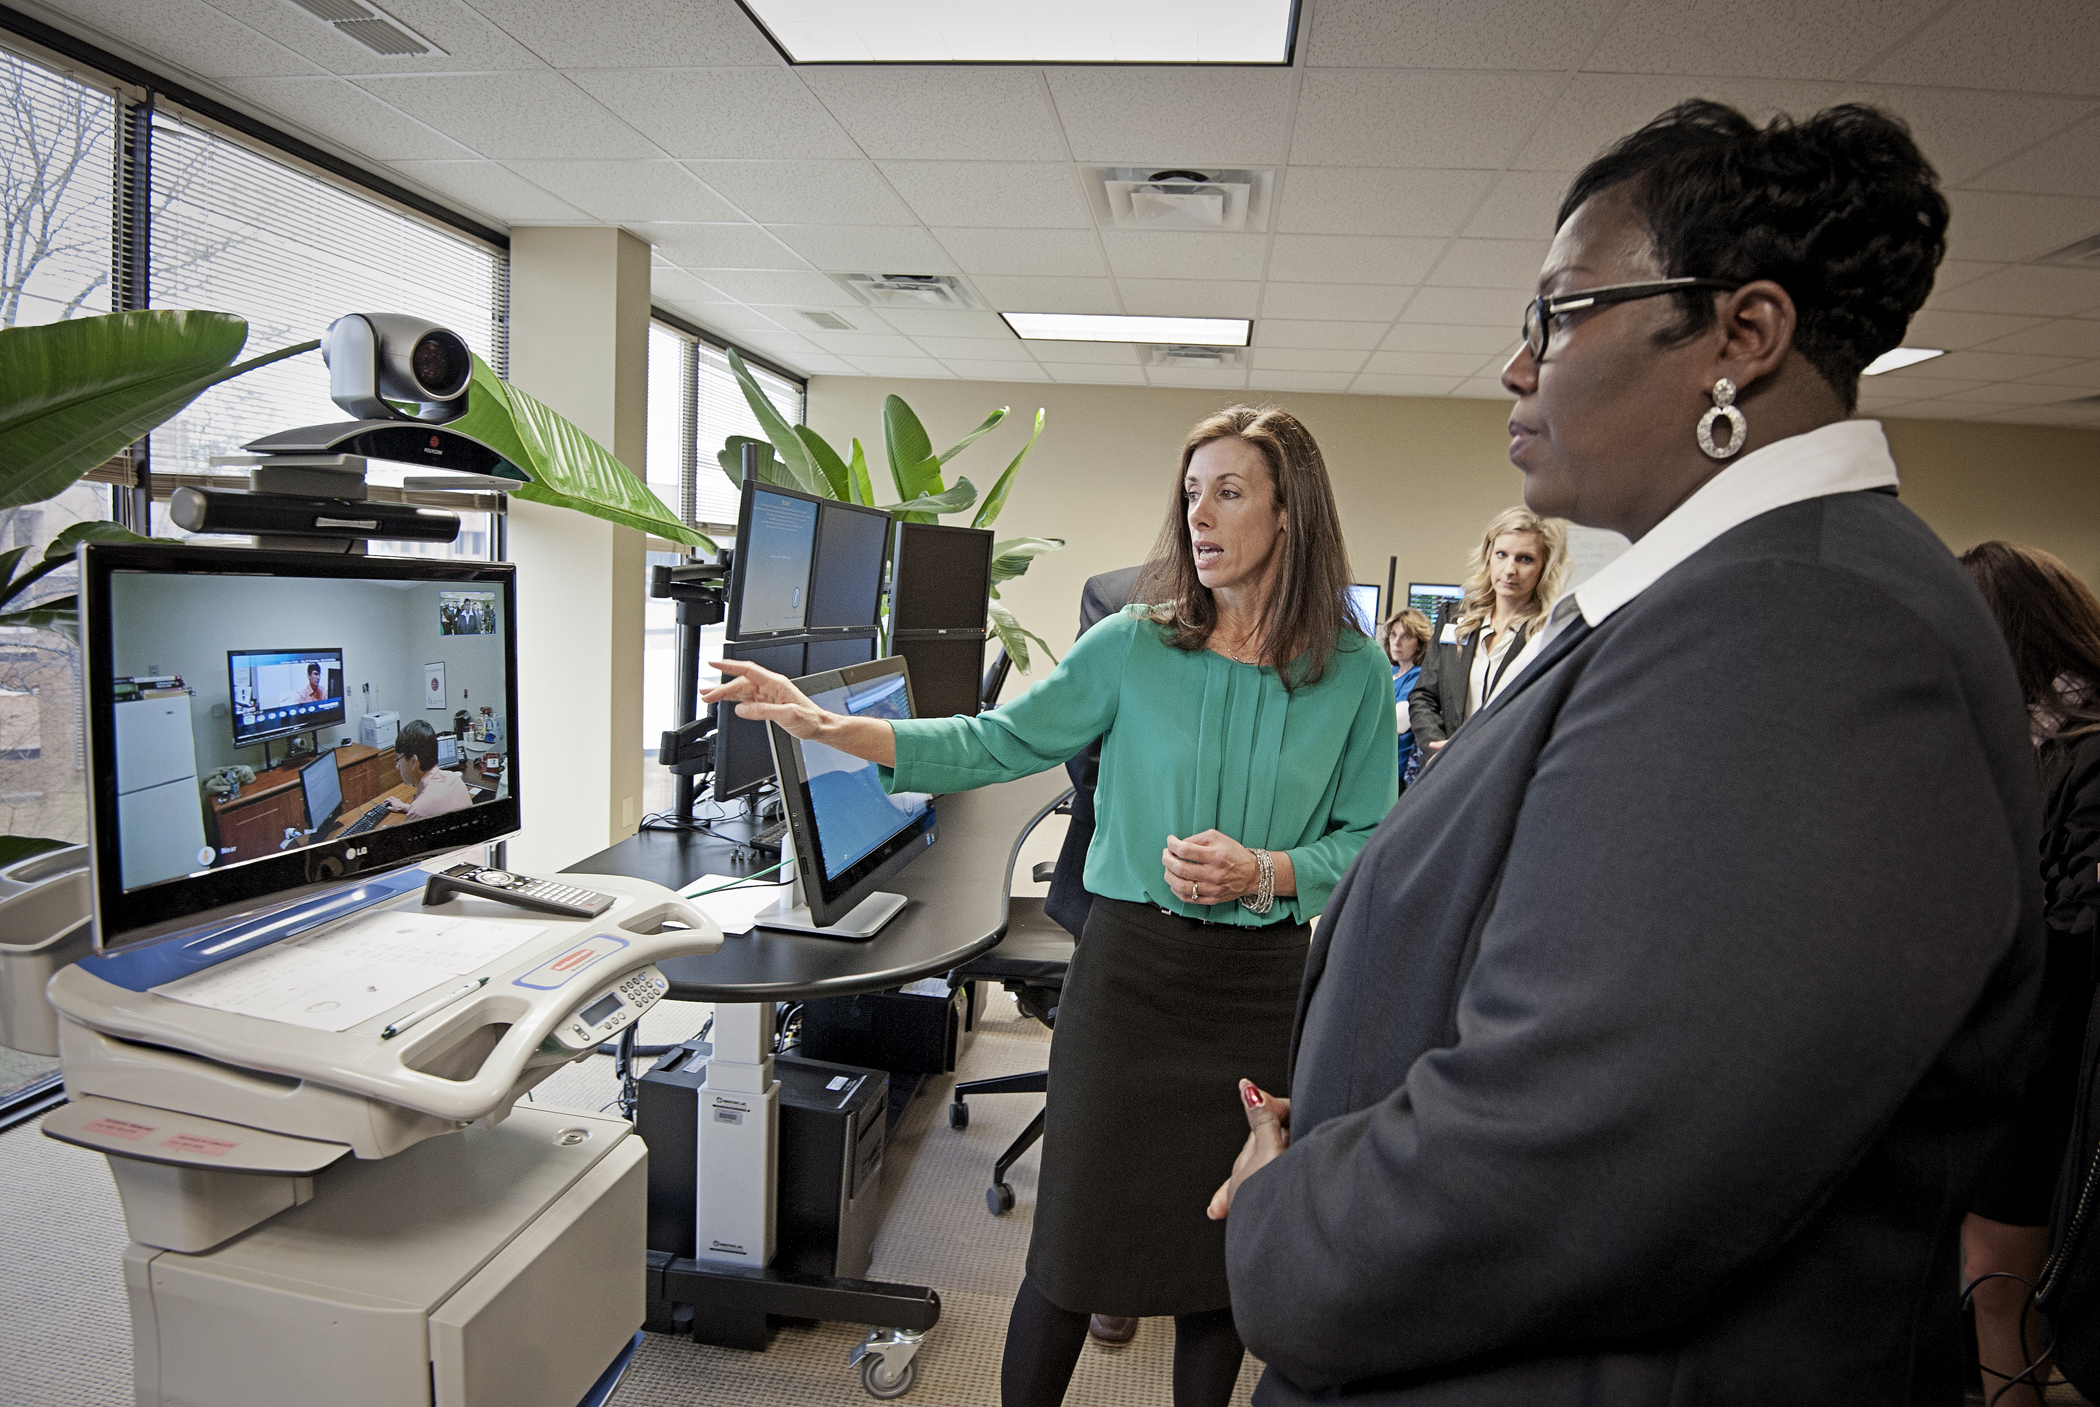 Dr. Kristi Henderson, left, UMMC director of Telehealth and chief advanced practice officer, and Trina George, right, Mississippi state USDA director of rural development, demonstrate a telehealth system.